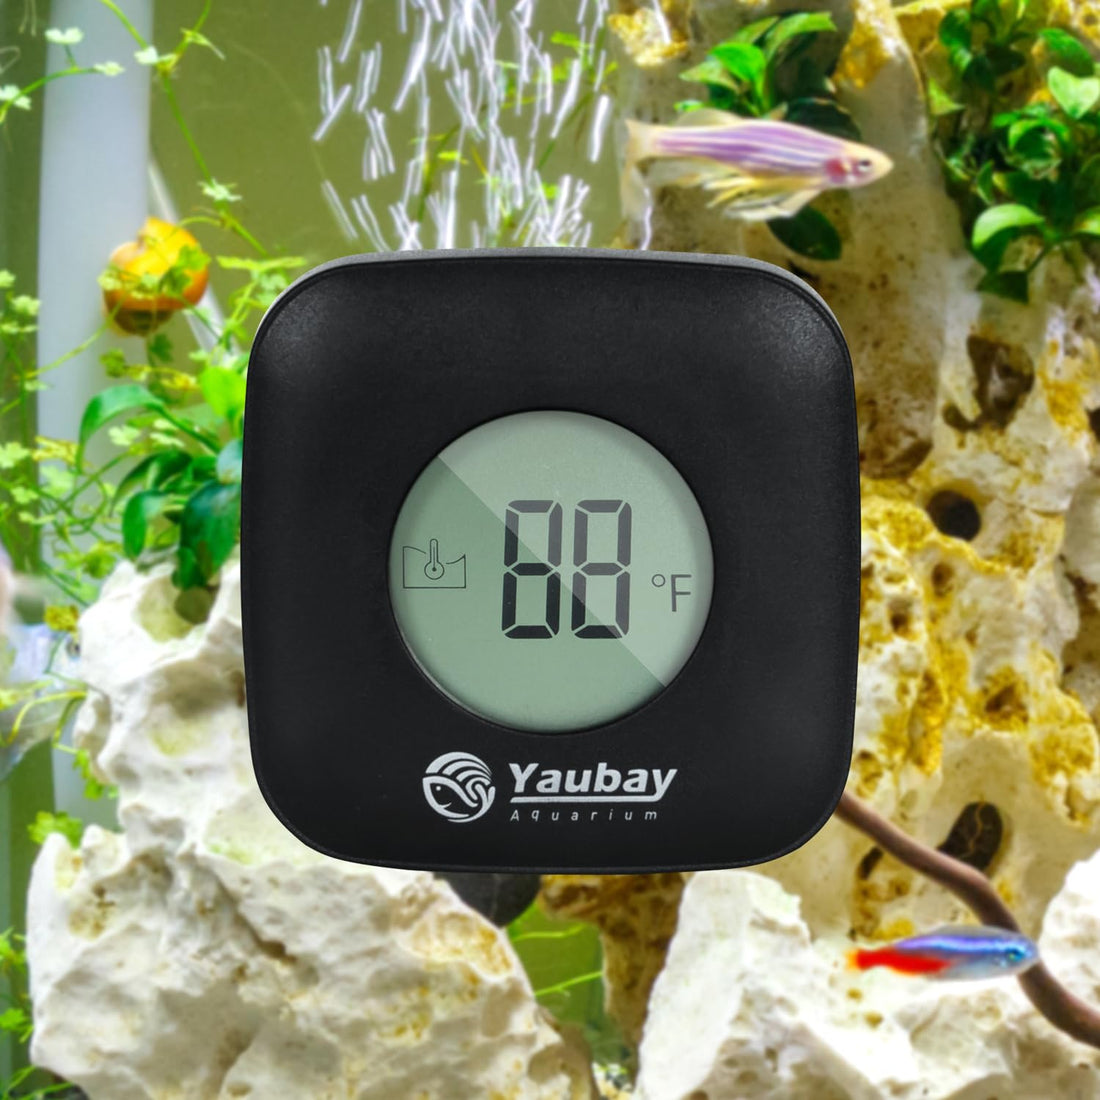 Yaubay Magnetic Aquarium Thermometer Glass Cleaner 2 in 1 Fish Tank Digital Temperature Gauge with Floating Algae Cleaner Brush Tool for Small 1/4 Inch Thick Glass Freshwater and Saltwater Tanks